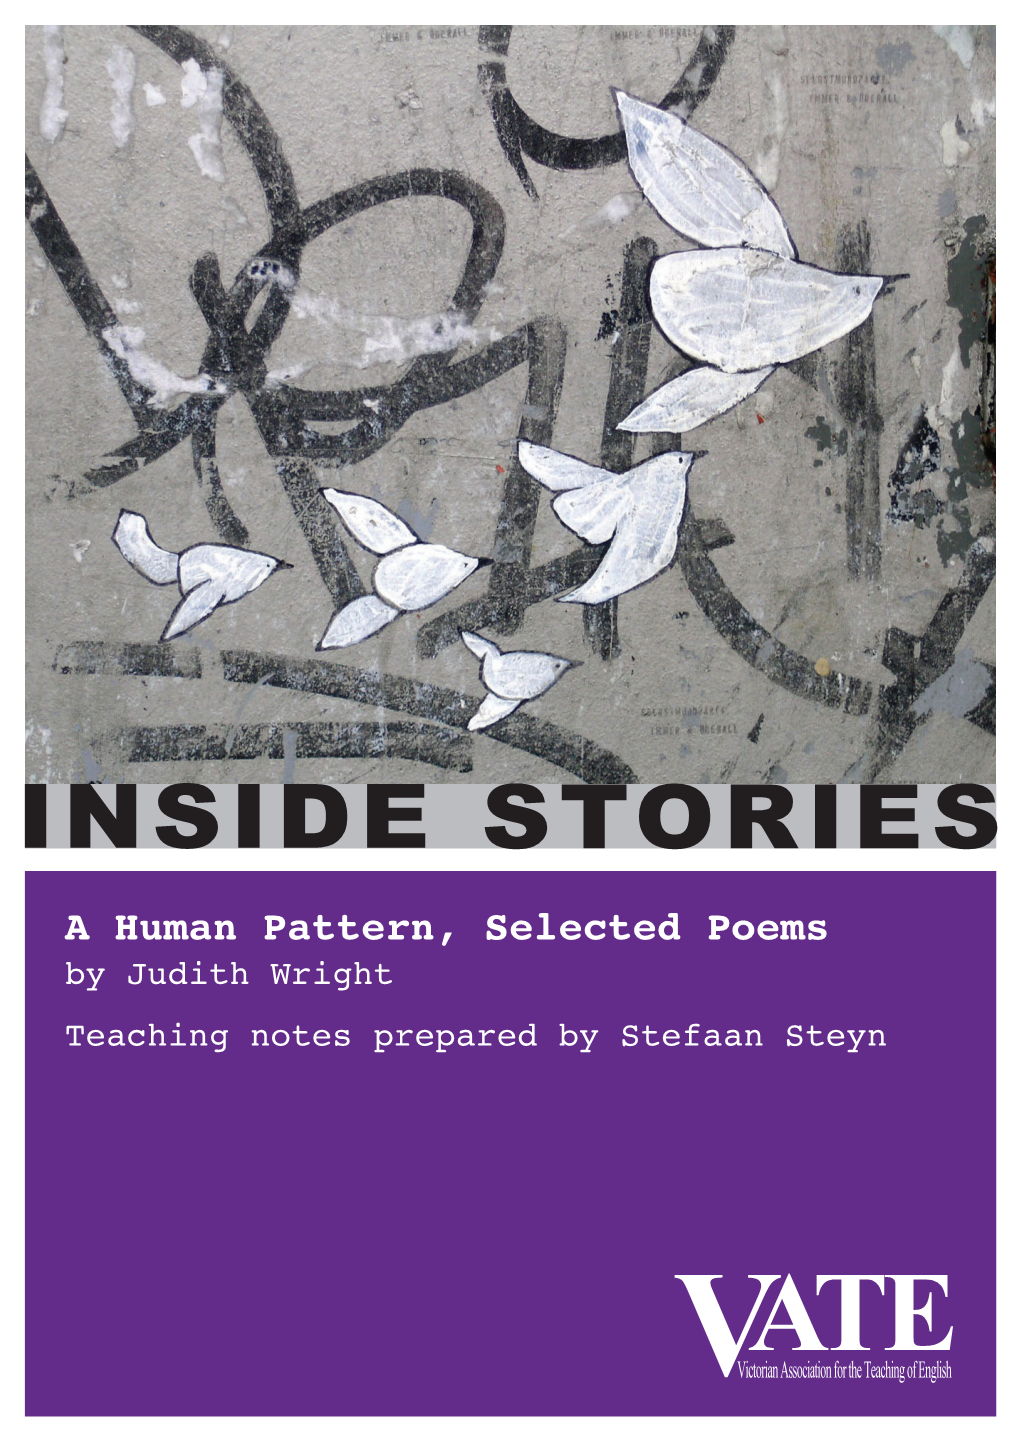 INSIDE STORIES a Human Pattern, Selected Poems by Judith Wright Teaching Notes Prepared by Stefaan Steyn a HUMAN PATTERN – SELECTED POEMS by Judith Wright